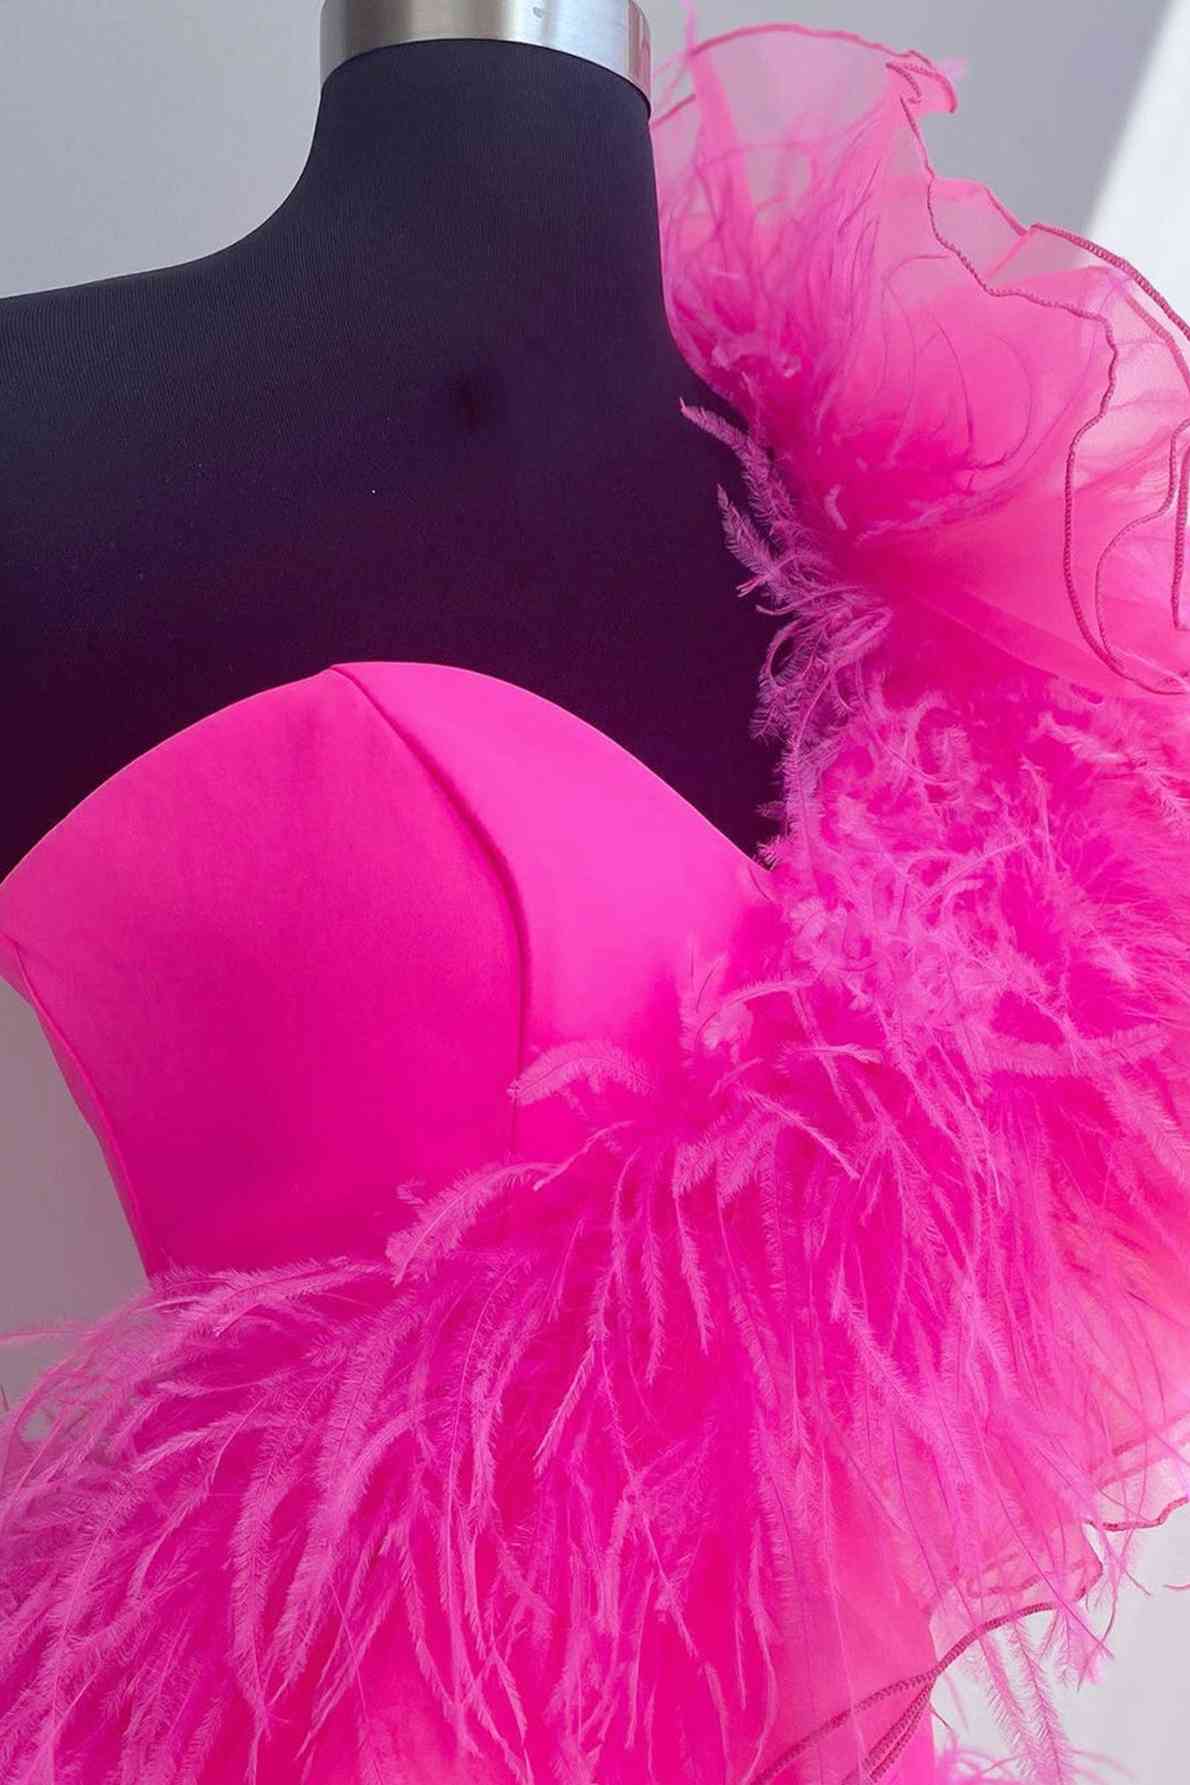 Party Dress Miami, Hot Pink Ruffled Short Homecoming Dress with Feathers